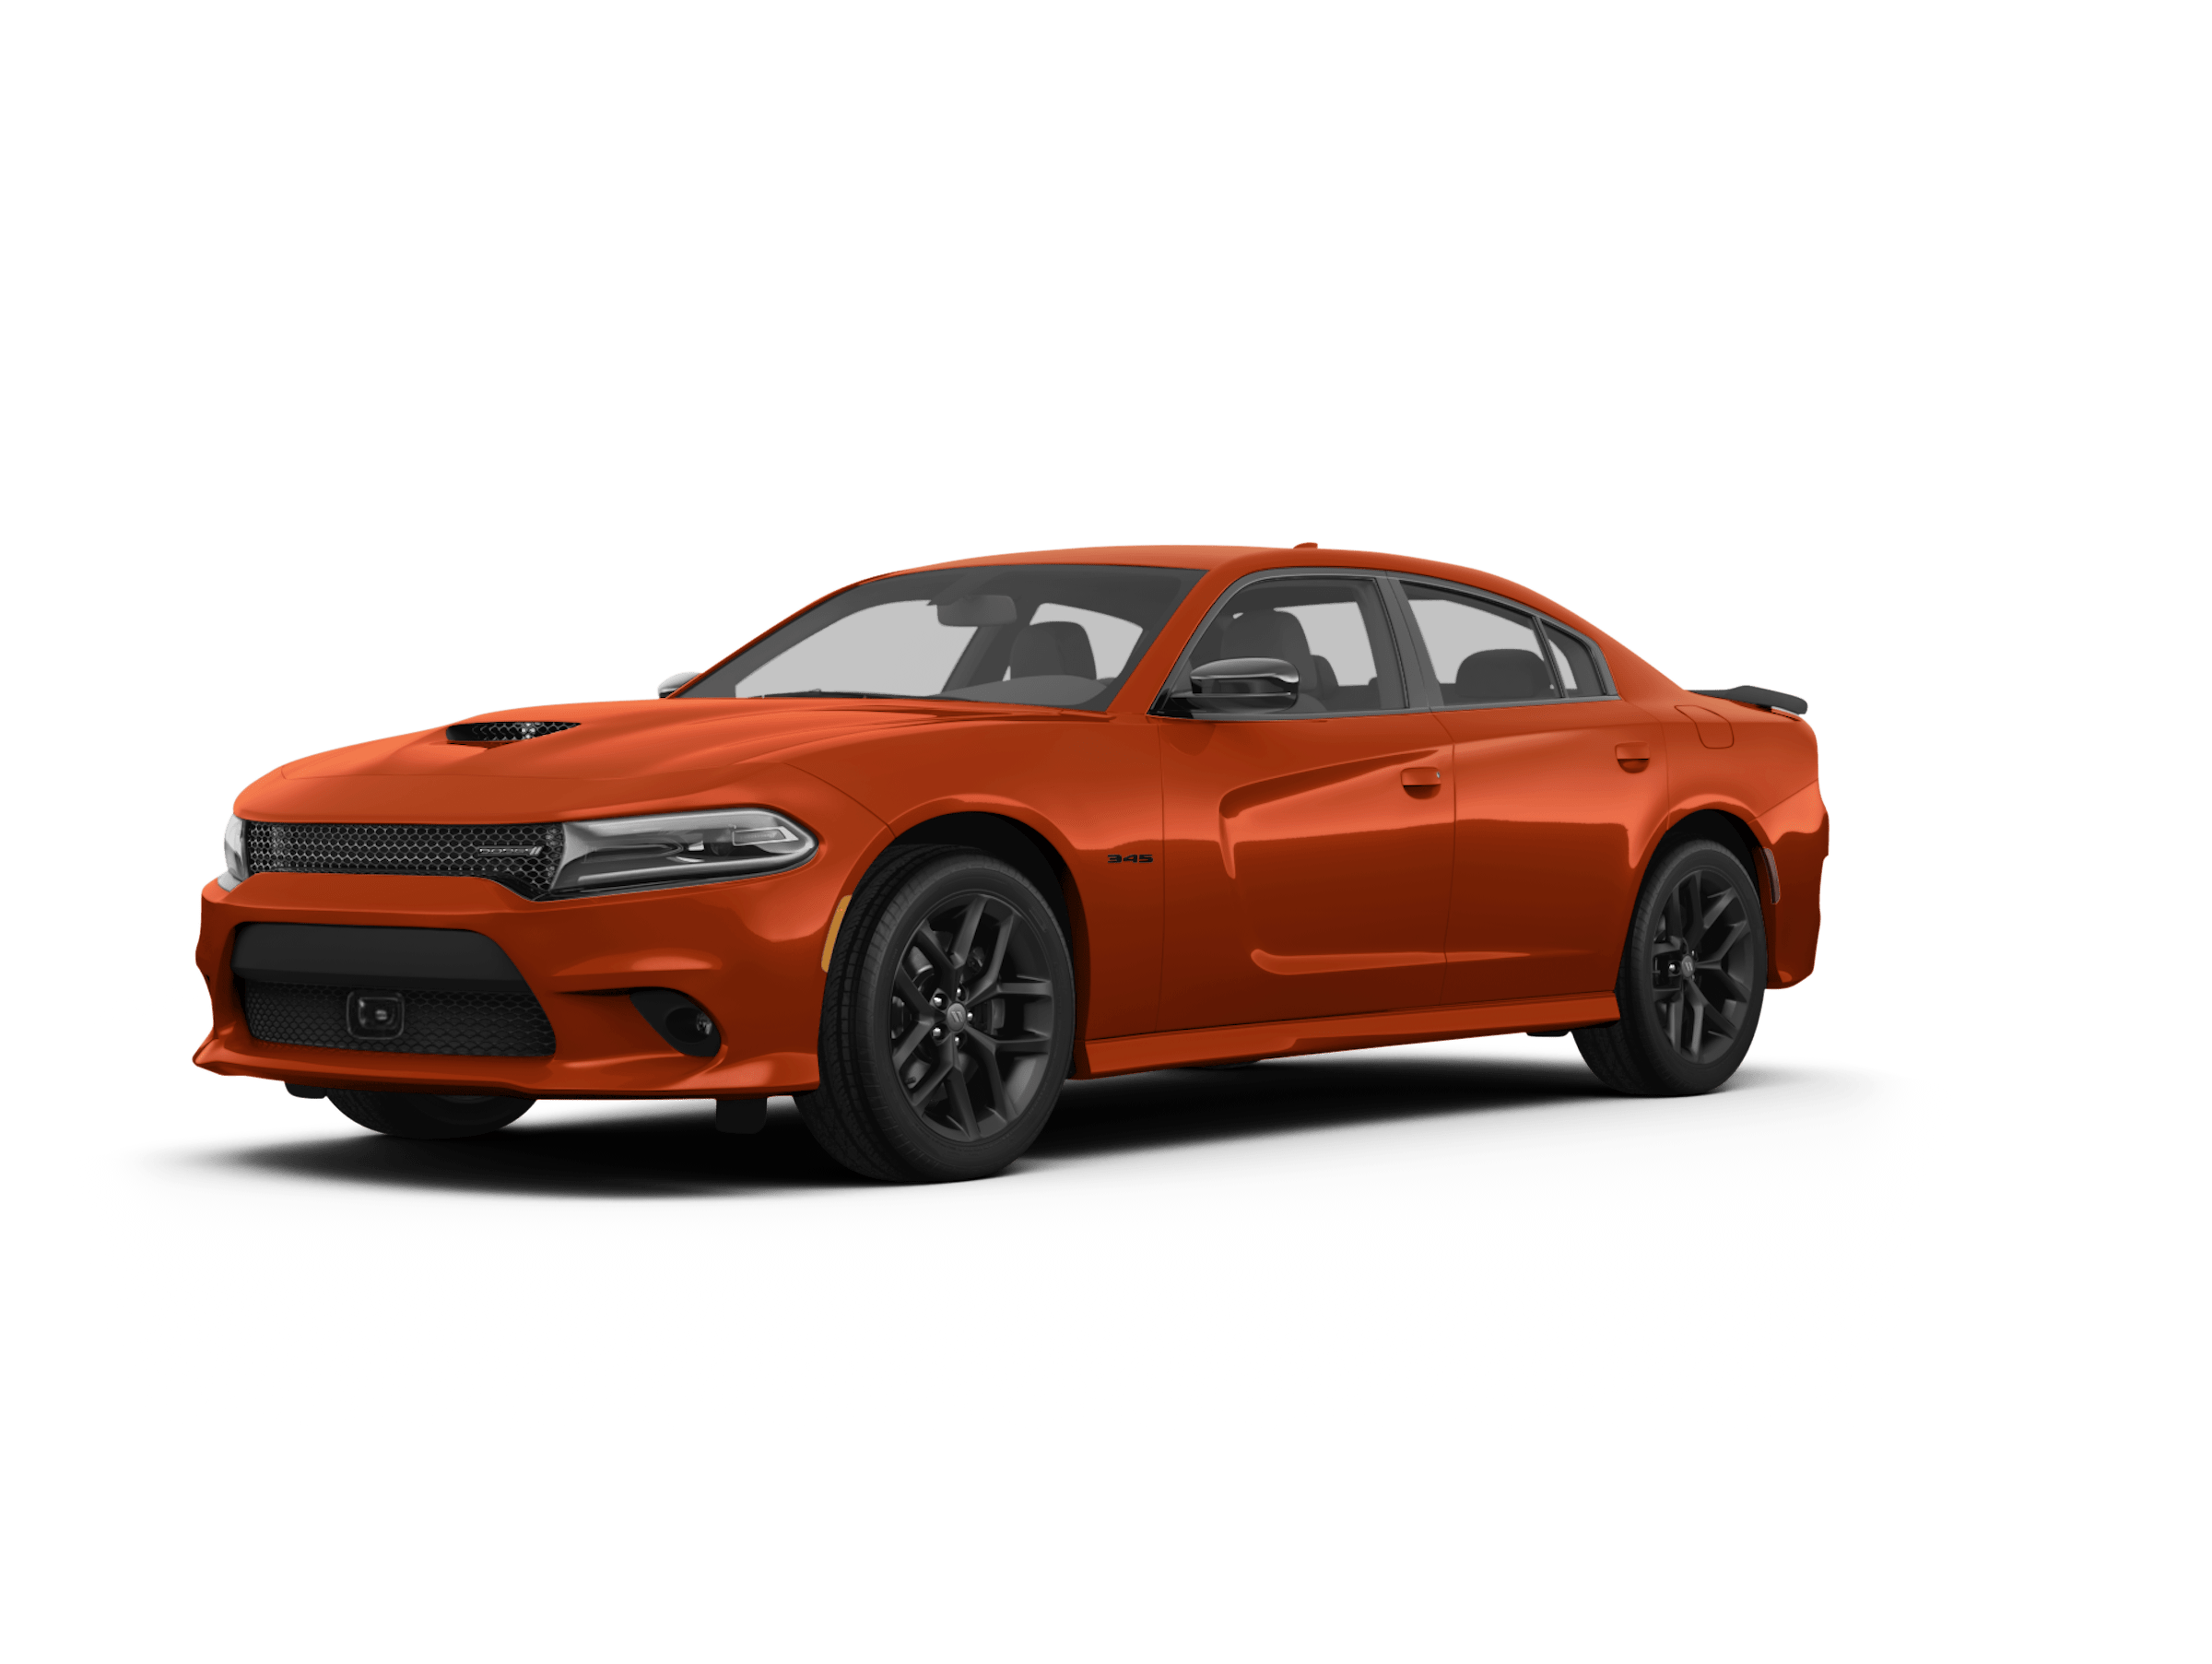 New Dodge Charger Vehicles For Sale | Driveway